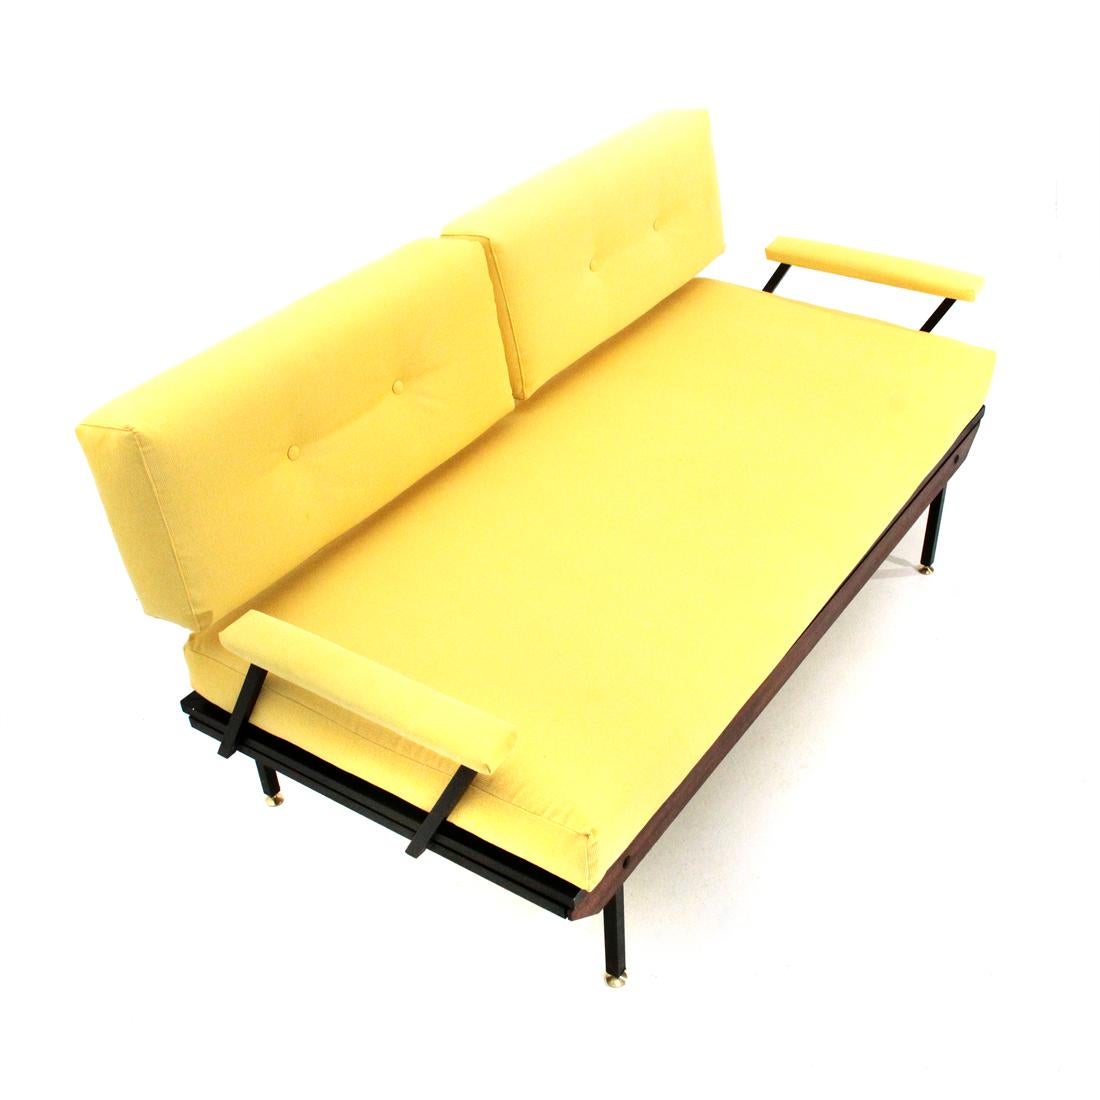 yellow sofabed